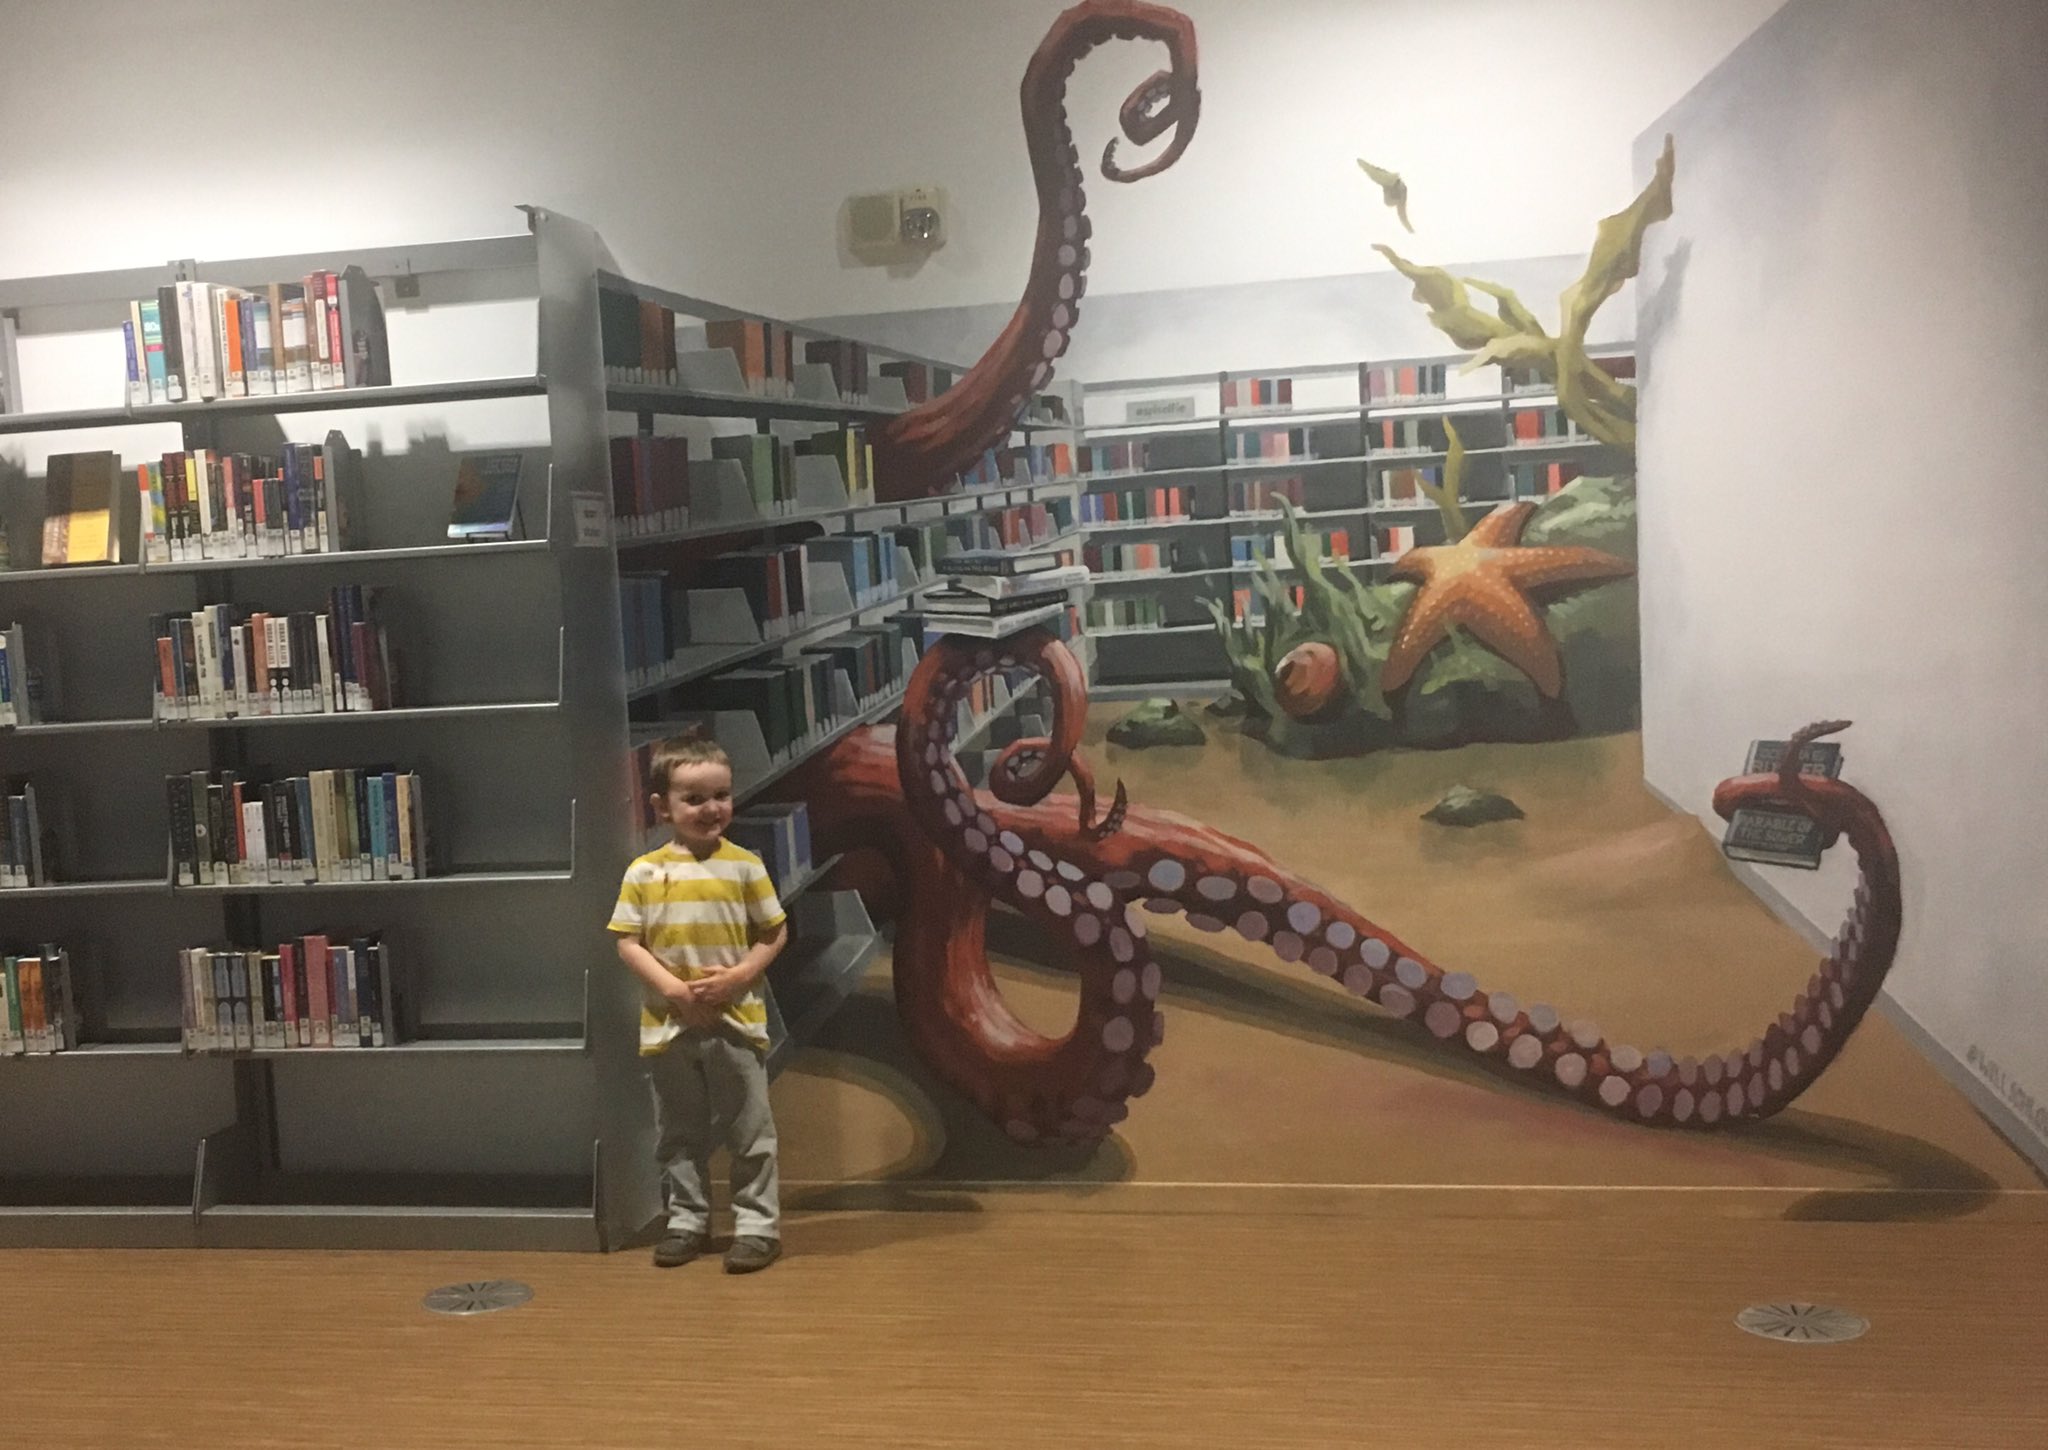 Off to the left is a library bookshelf. To the right of the bookshelf is a mural painted to look like additional library books stacks and it looks like very large octopus arms are reaching through the open shelving. Julian is standing next to the octopus arms.